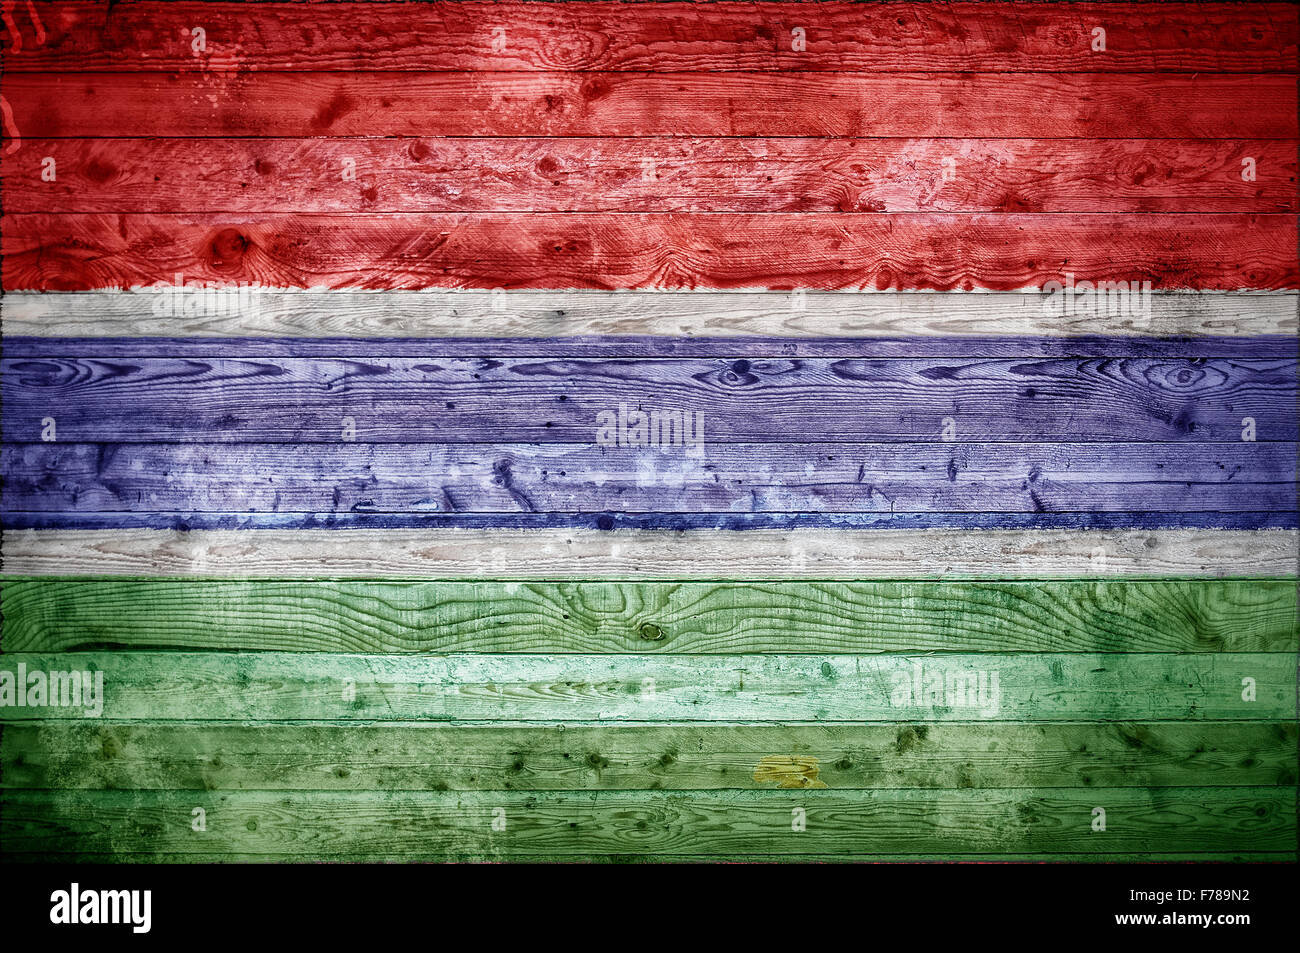 A vignetted background image of the flag of Gambia painted onto wooden boards of a wall or floor. Stock Photo